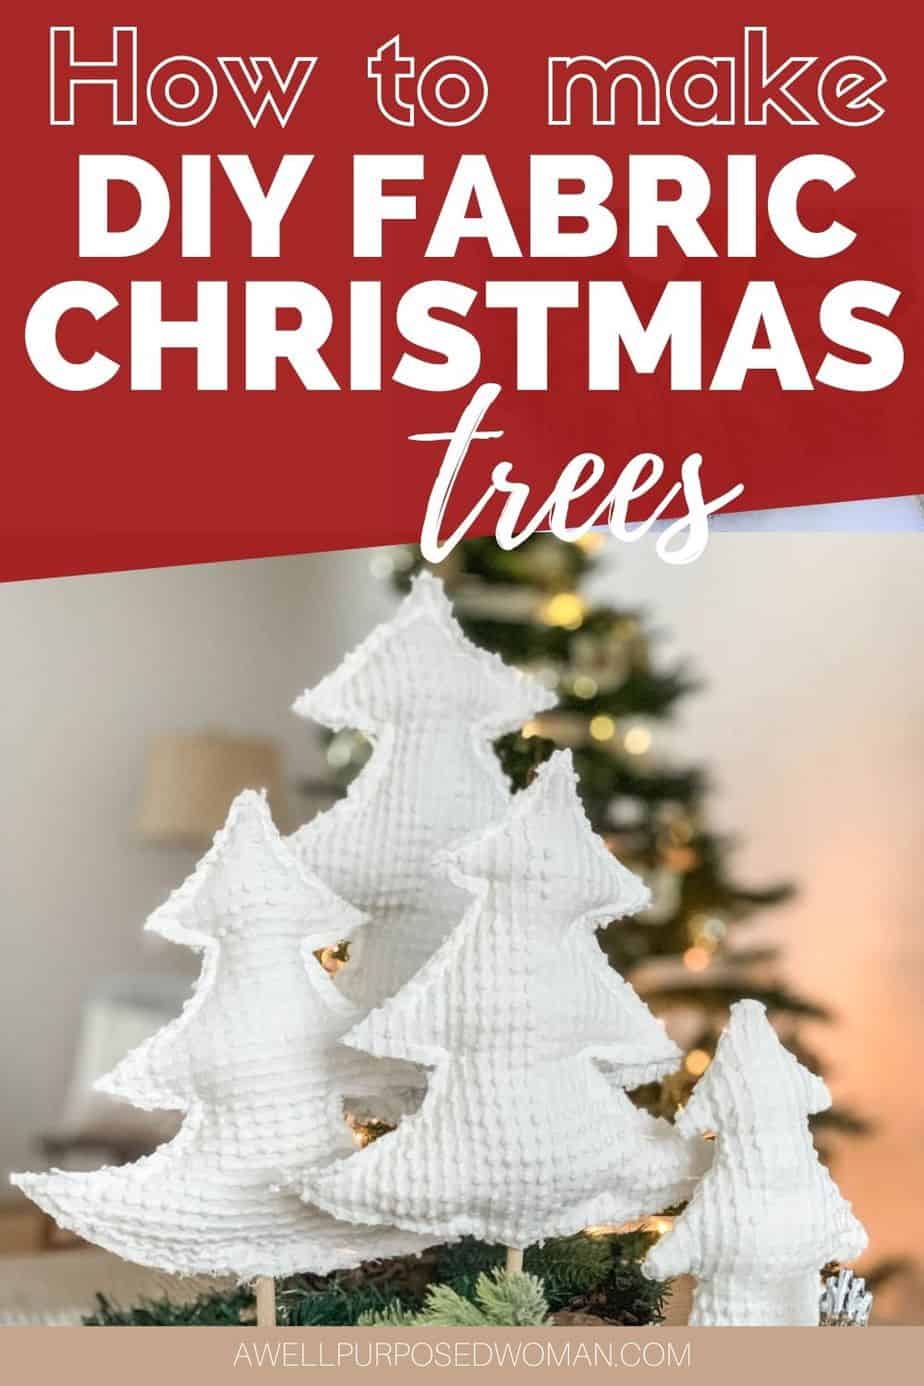 how-to-make-diy-fabric-christmas-trees-with-free-pattern-a-well